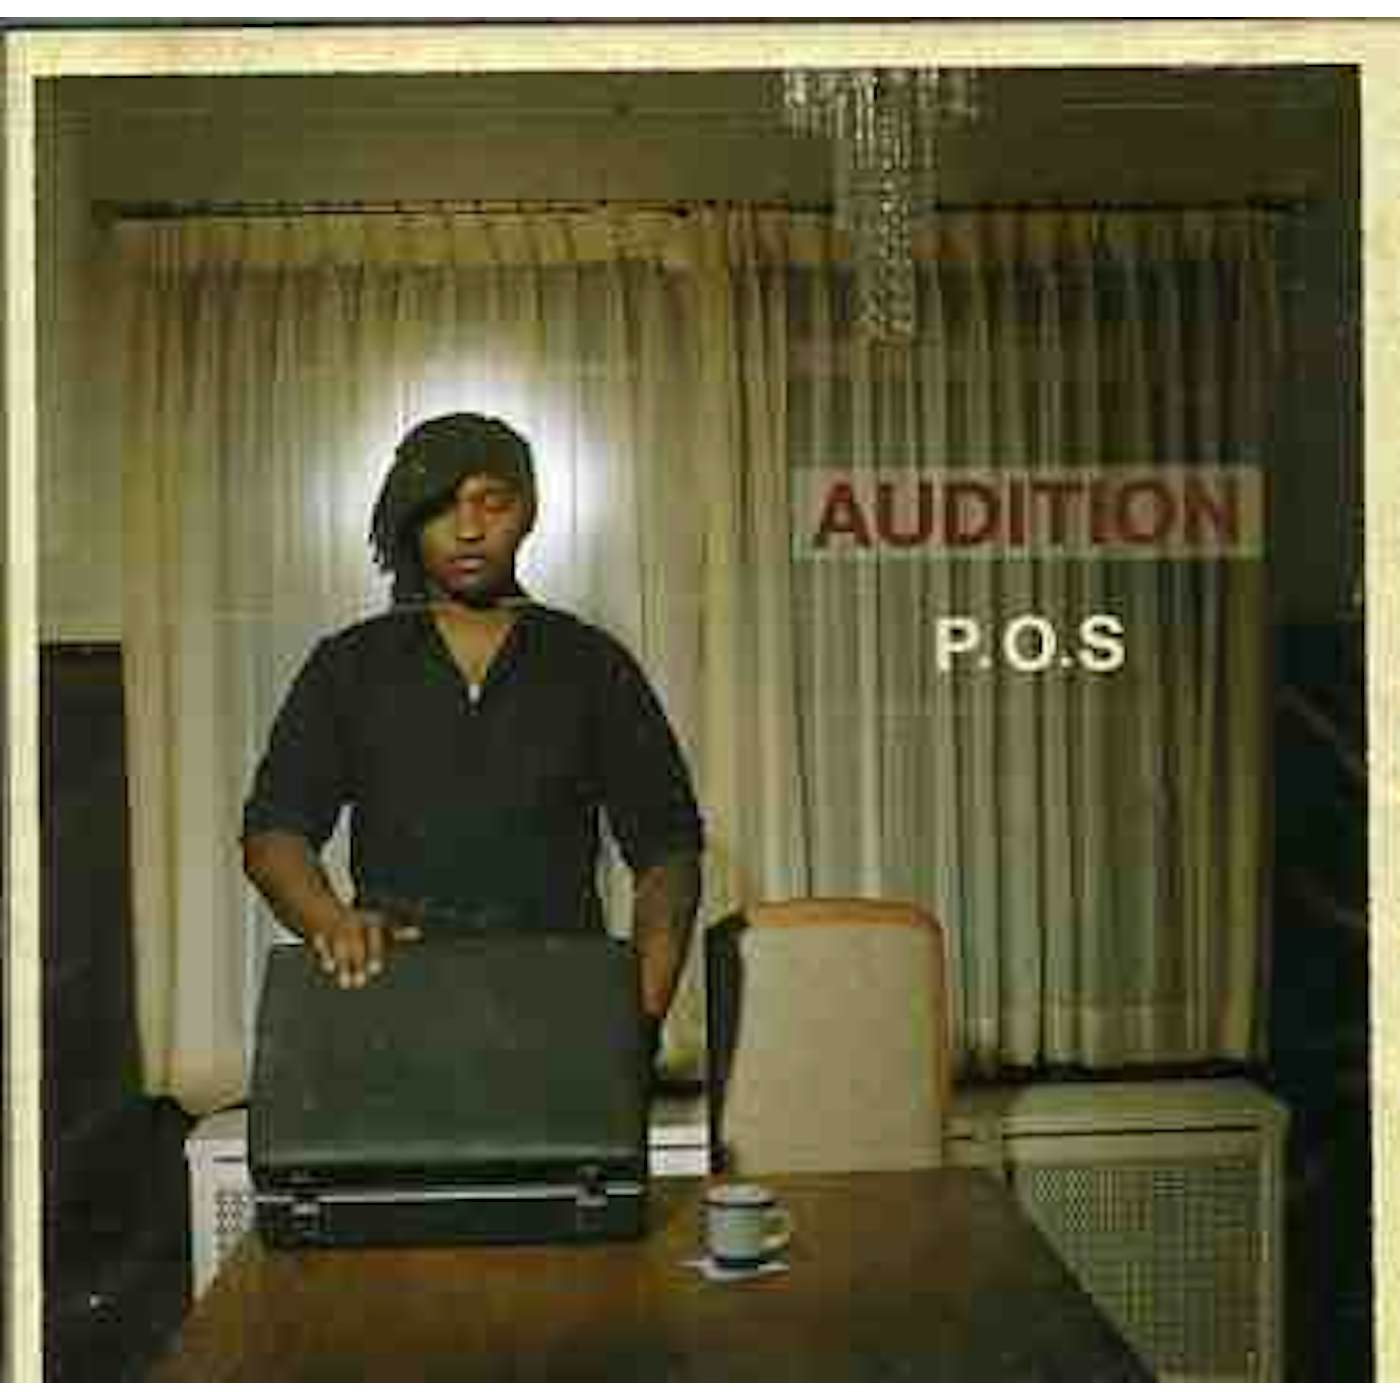 P.O.S AUDITION CD